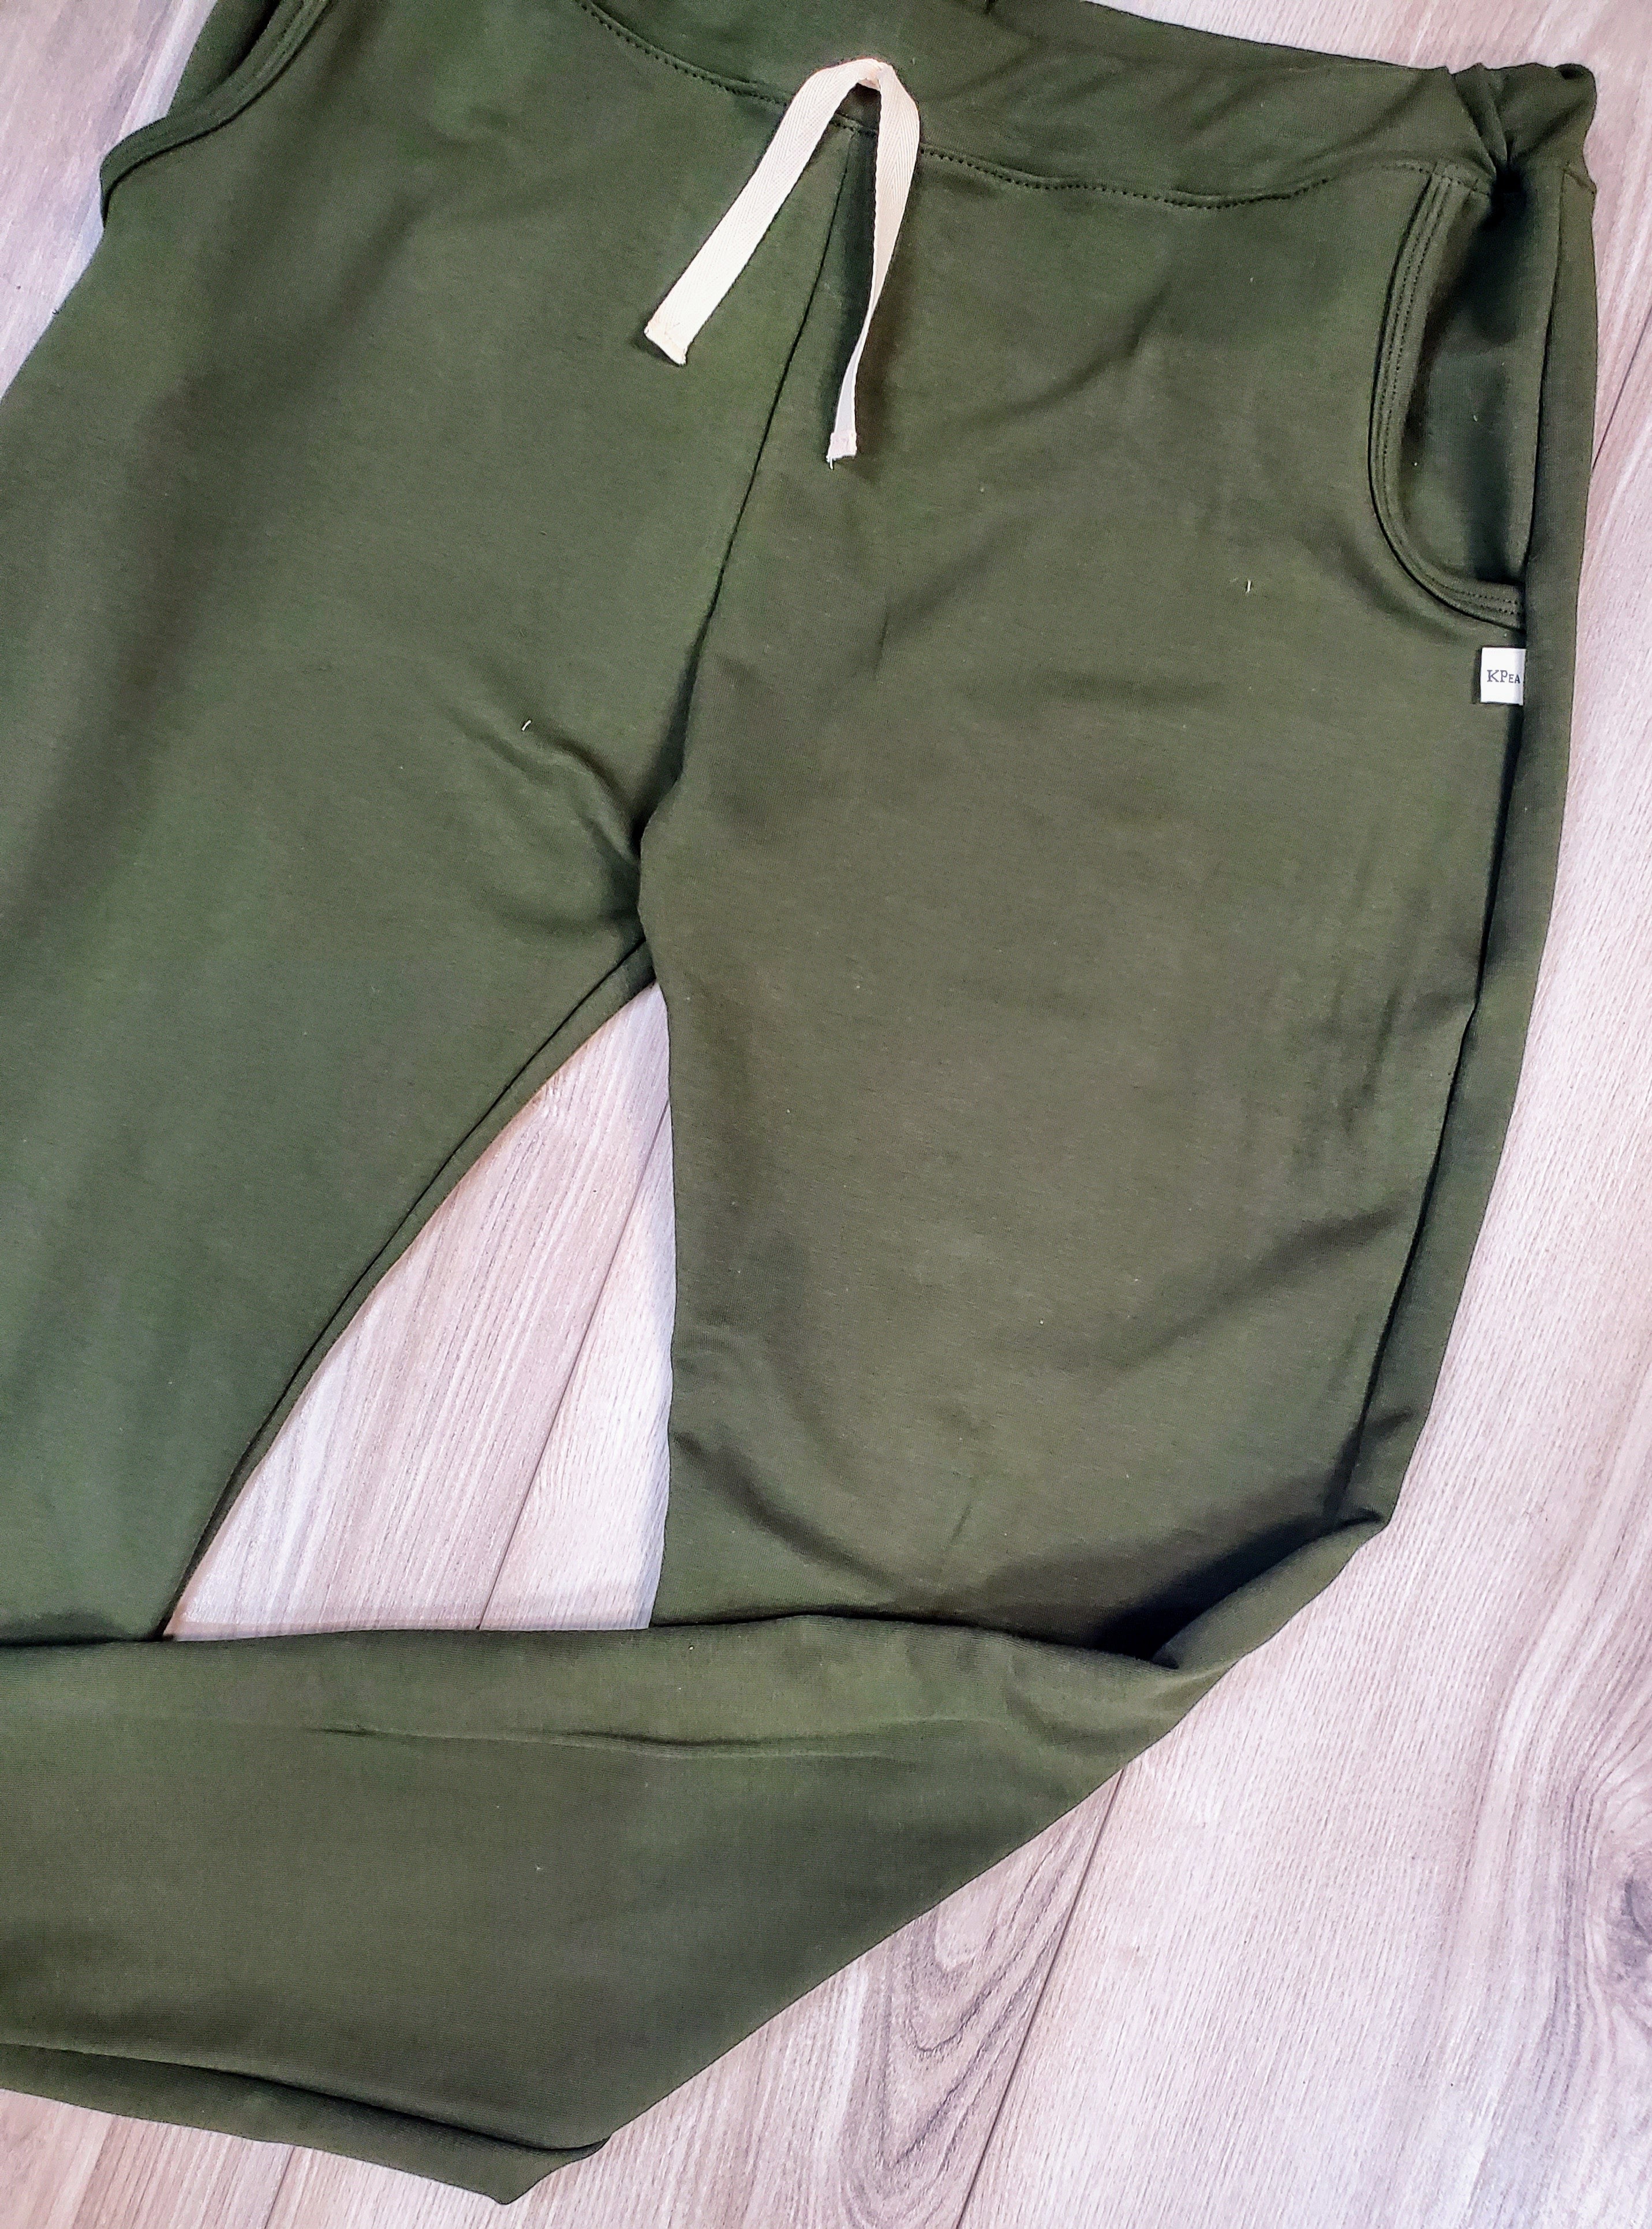 Olive Joggers